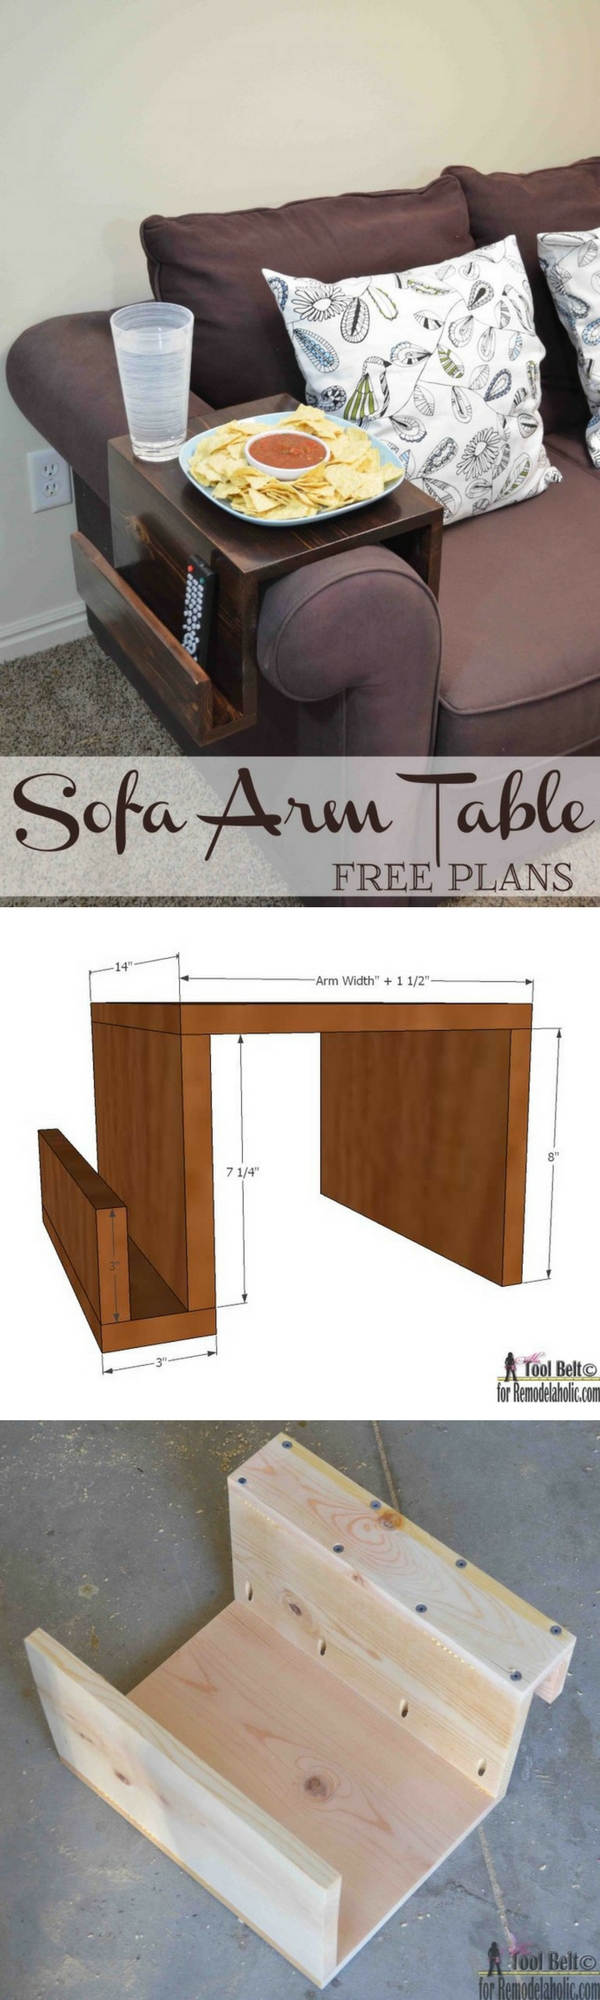 easy unique diy side table ideas you can build budget sofa arm accent plans tables check out the pottery barn reclaimed wood dale tiffany dragonfly lamp keter beer cooler black